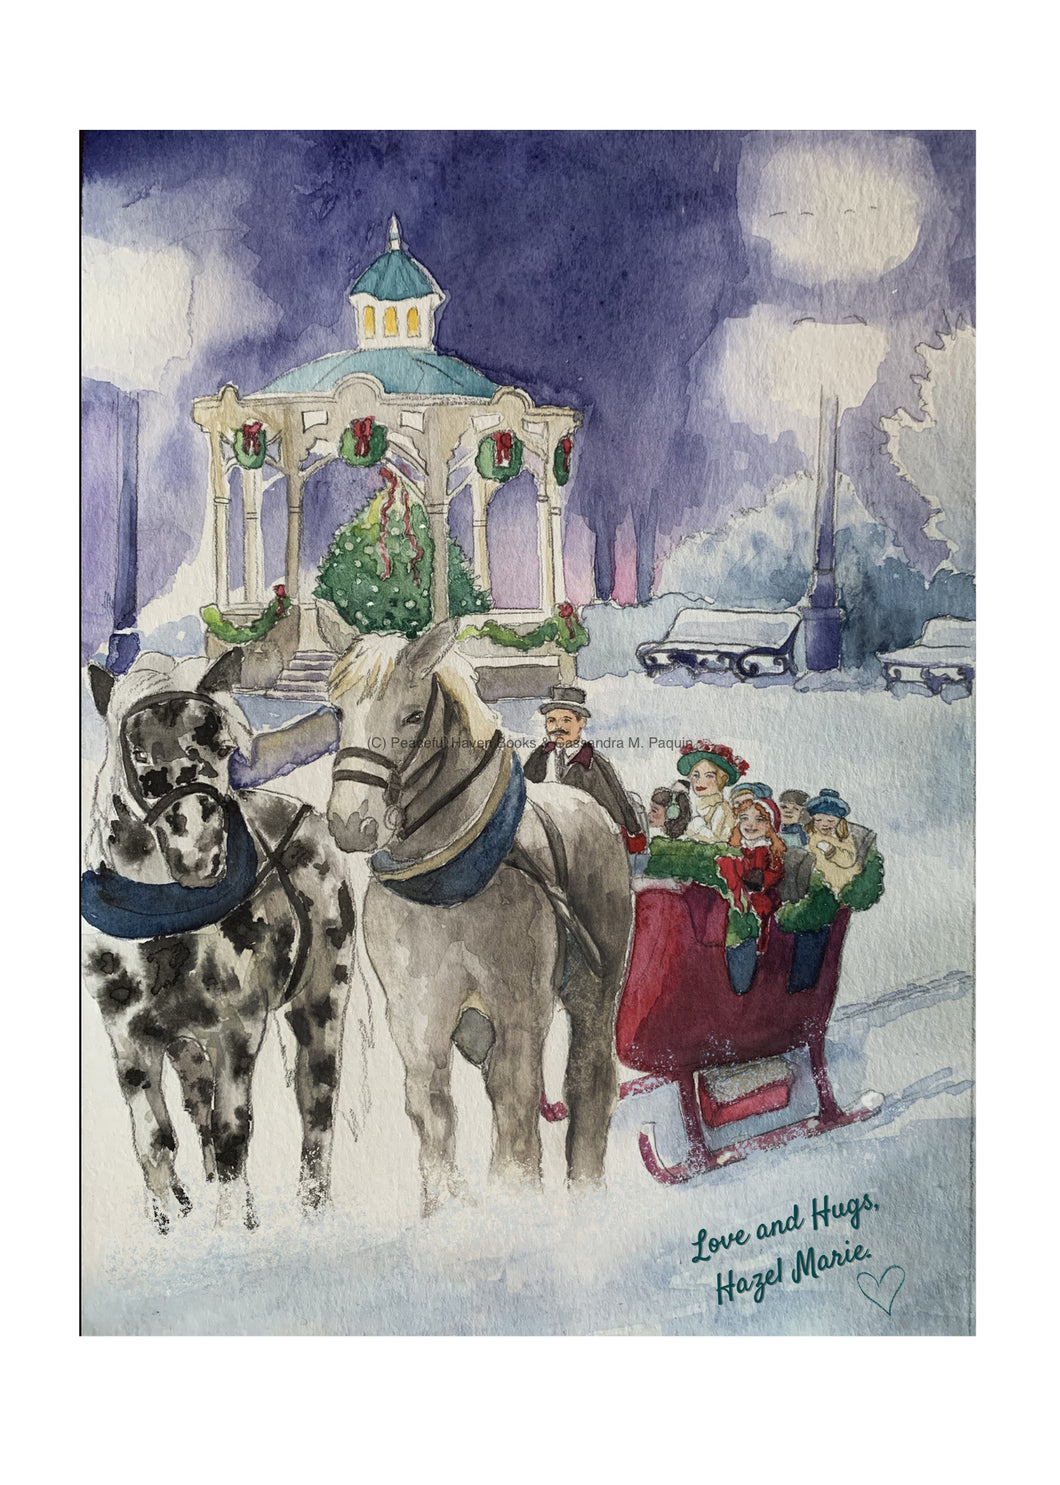 Vintage winter scene with Hazel Marie and friends after caroling on the village common and sharing Christmas joy with townsfolk. Beautiful digital watercolor illustration art print makes a lovely gift when framed and matted for someone special. A lovely companion to the book It’s Me, Hazel Marie! by author Cassandra M. Paquin.